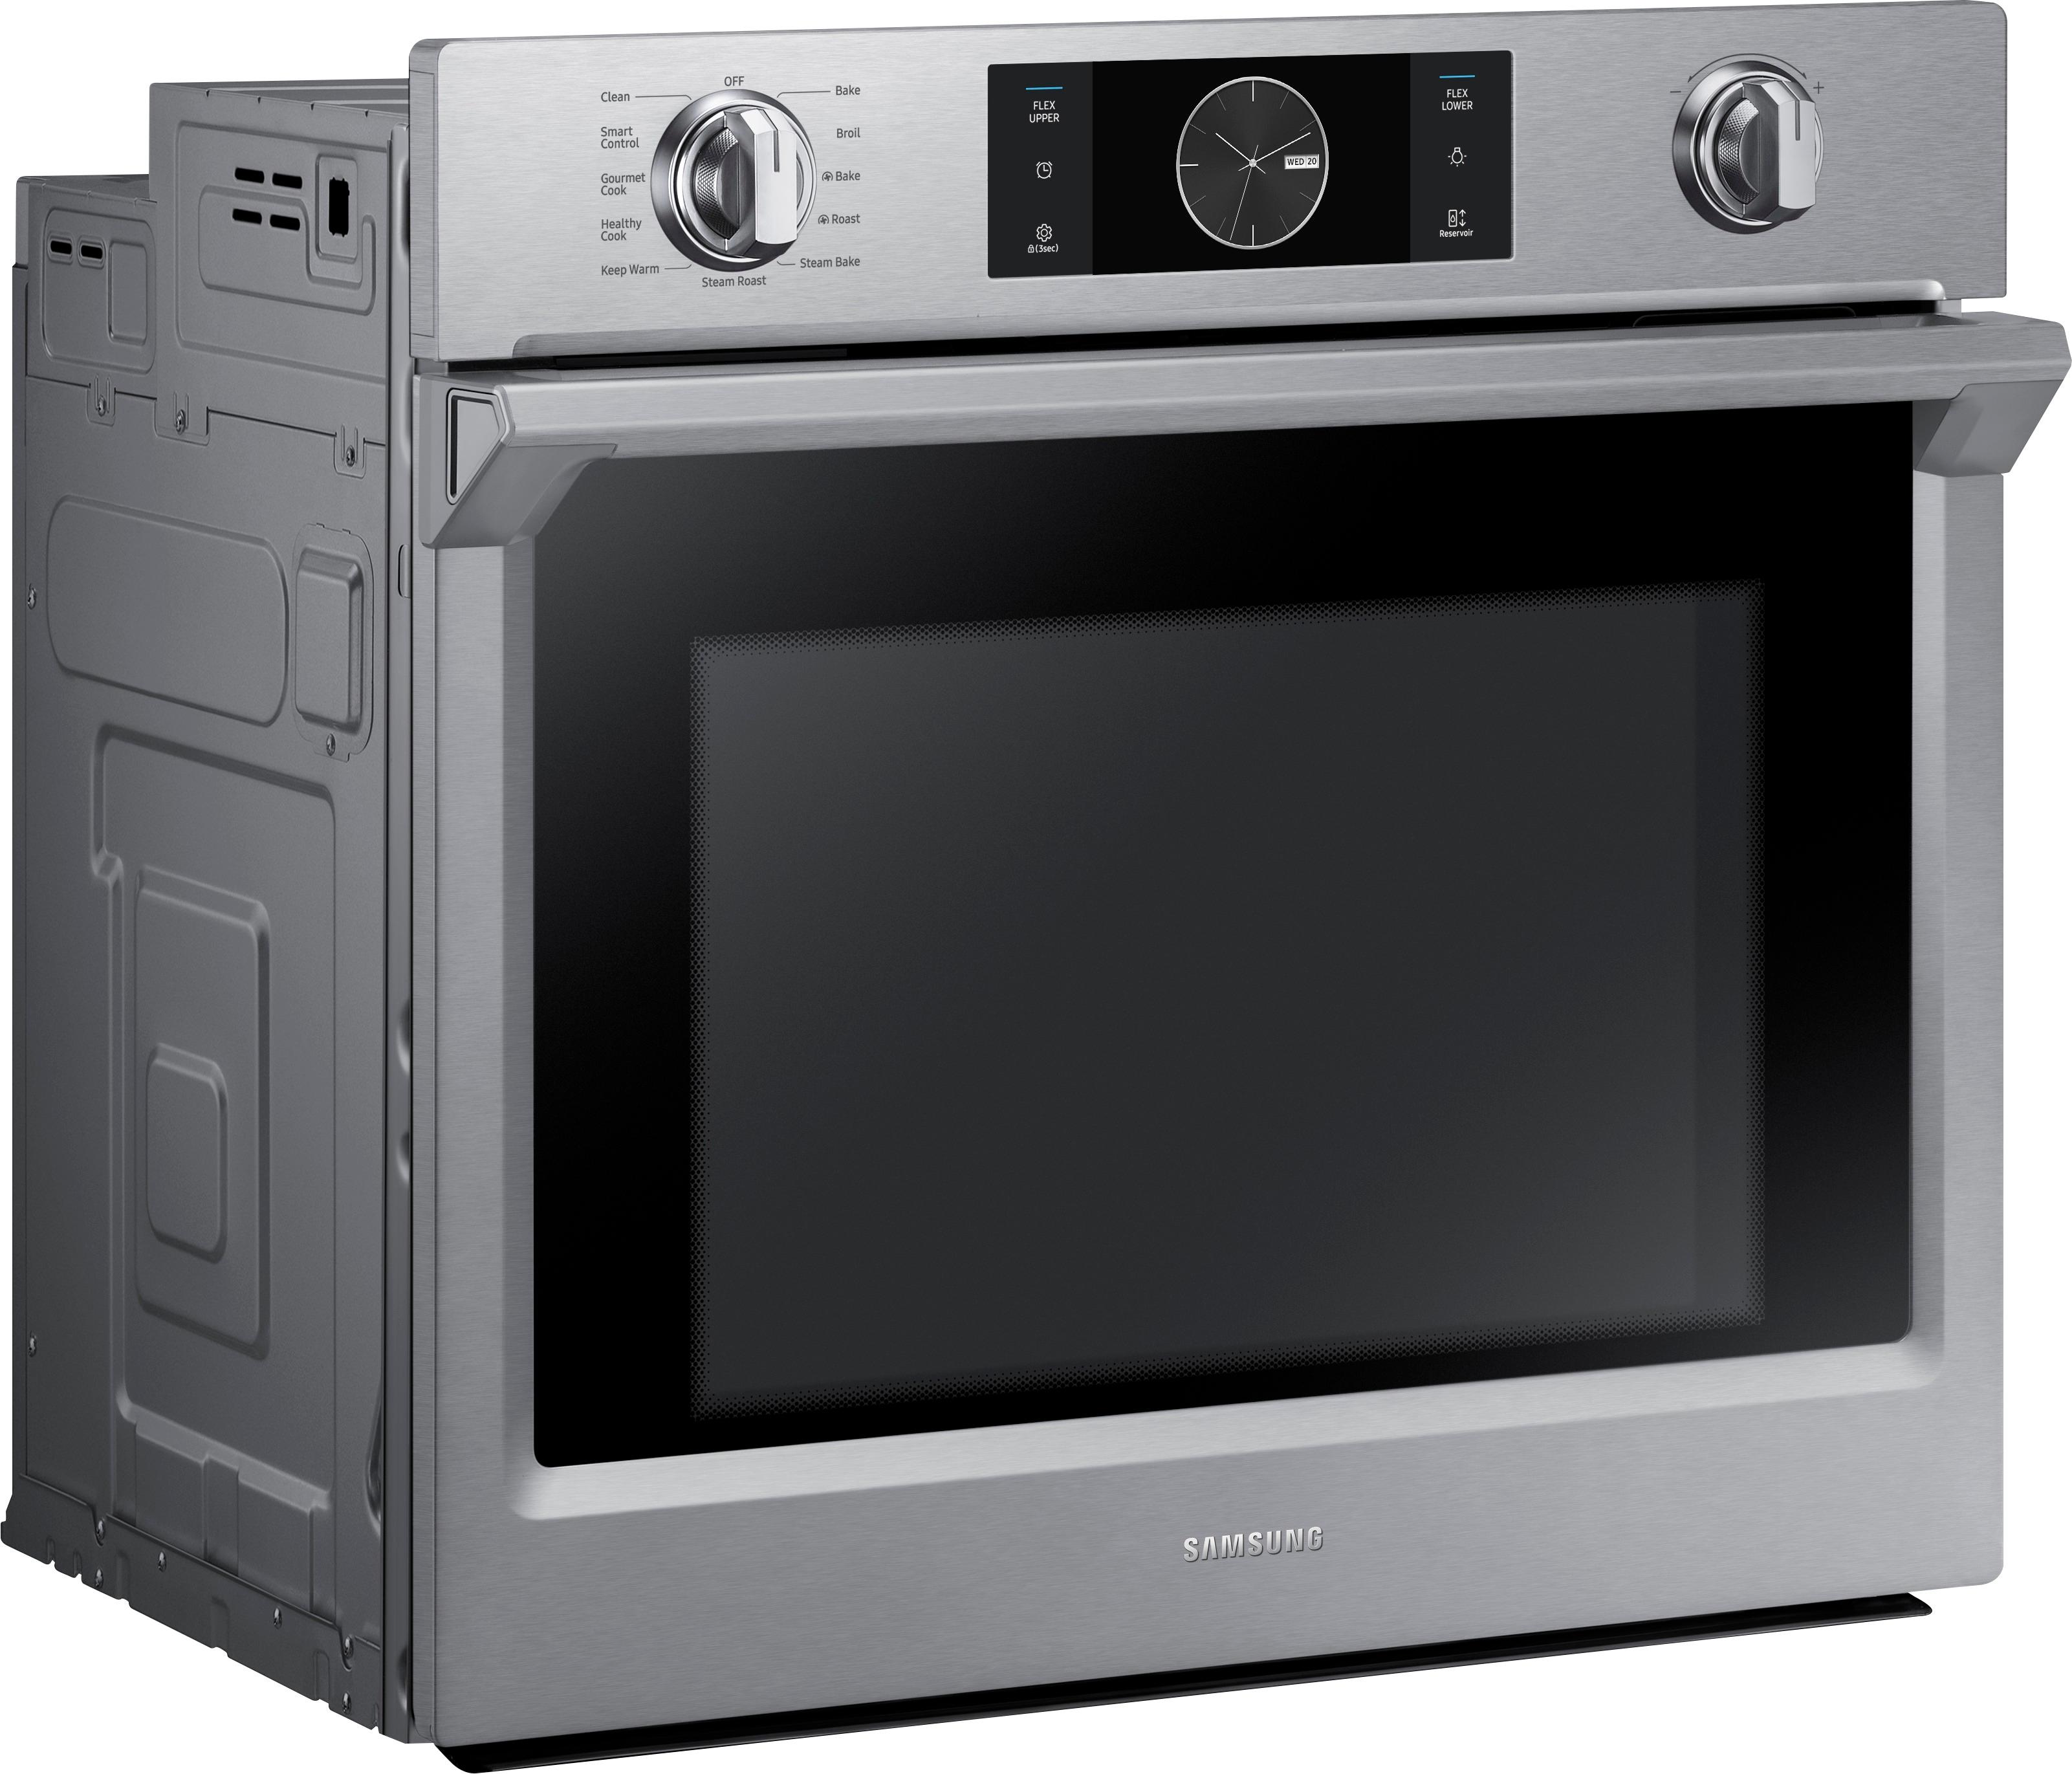 Angle View: GE - 24" Built-In Single Gas Wall Oven - Stainless steel